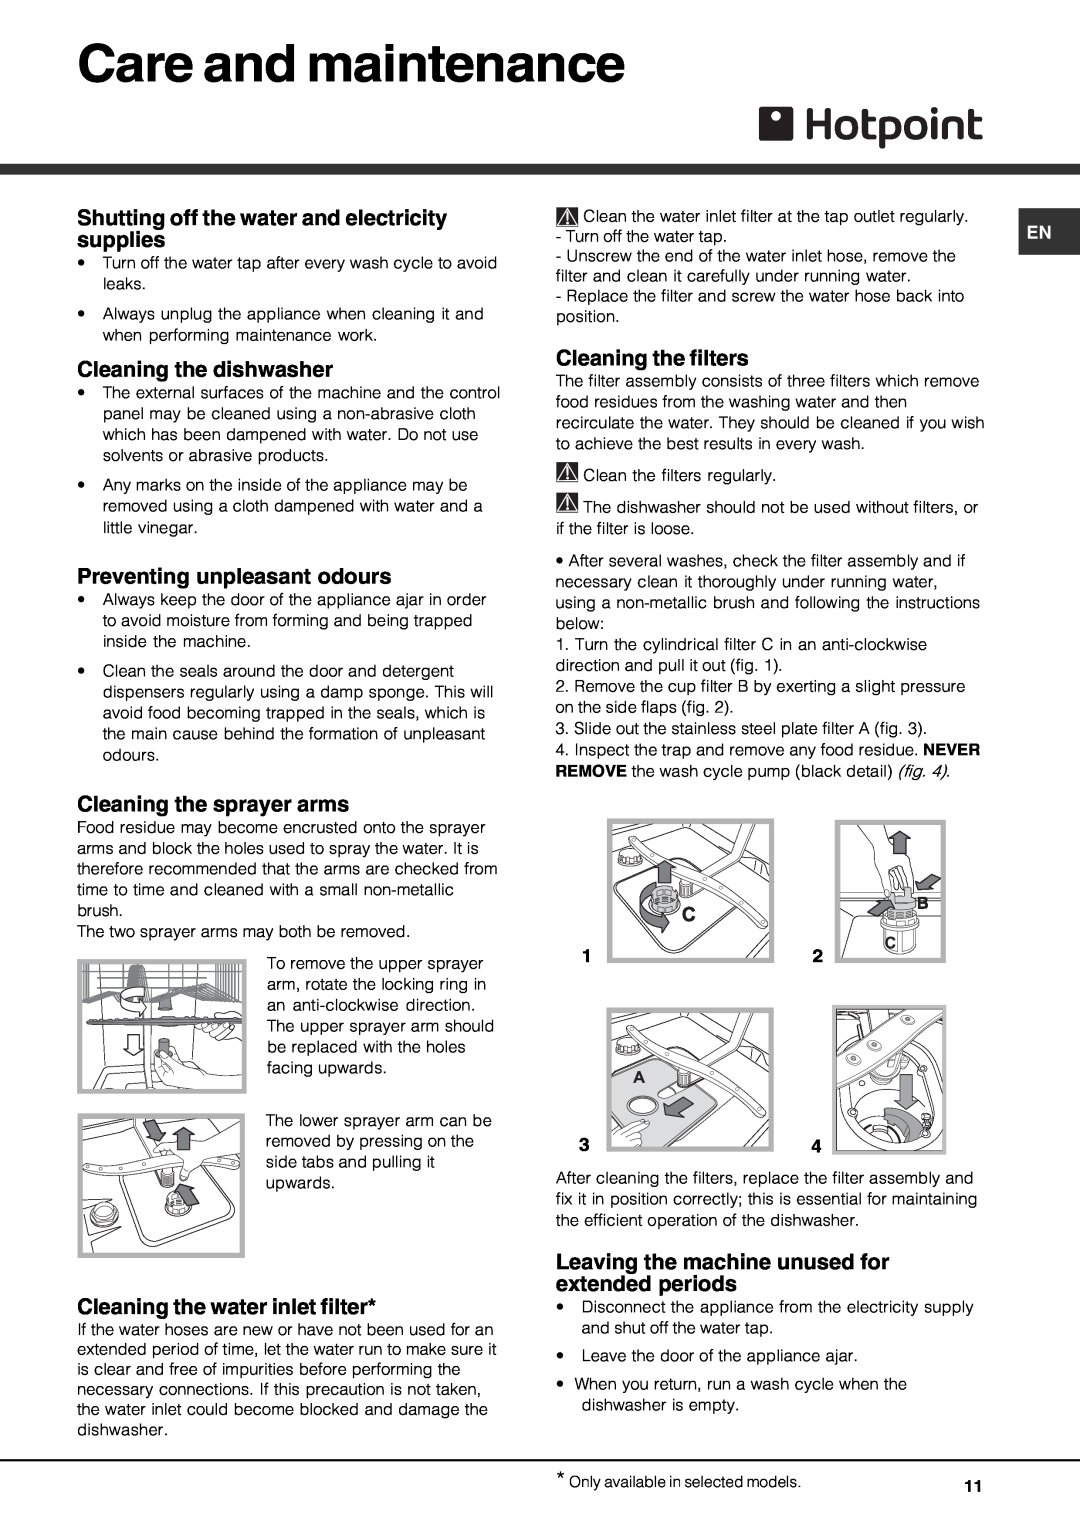 Hotpoint FDM550PR manual Care and maintenance, Shutting off the water and electricity, supplies, Cleaning the dishwasher 